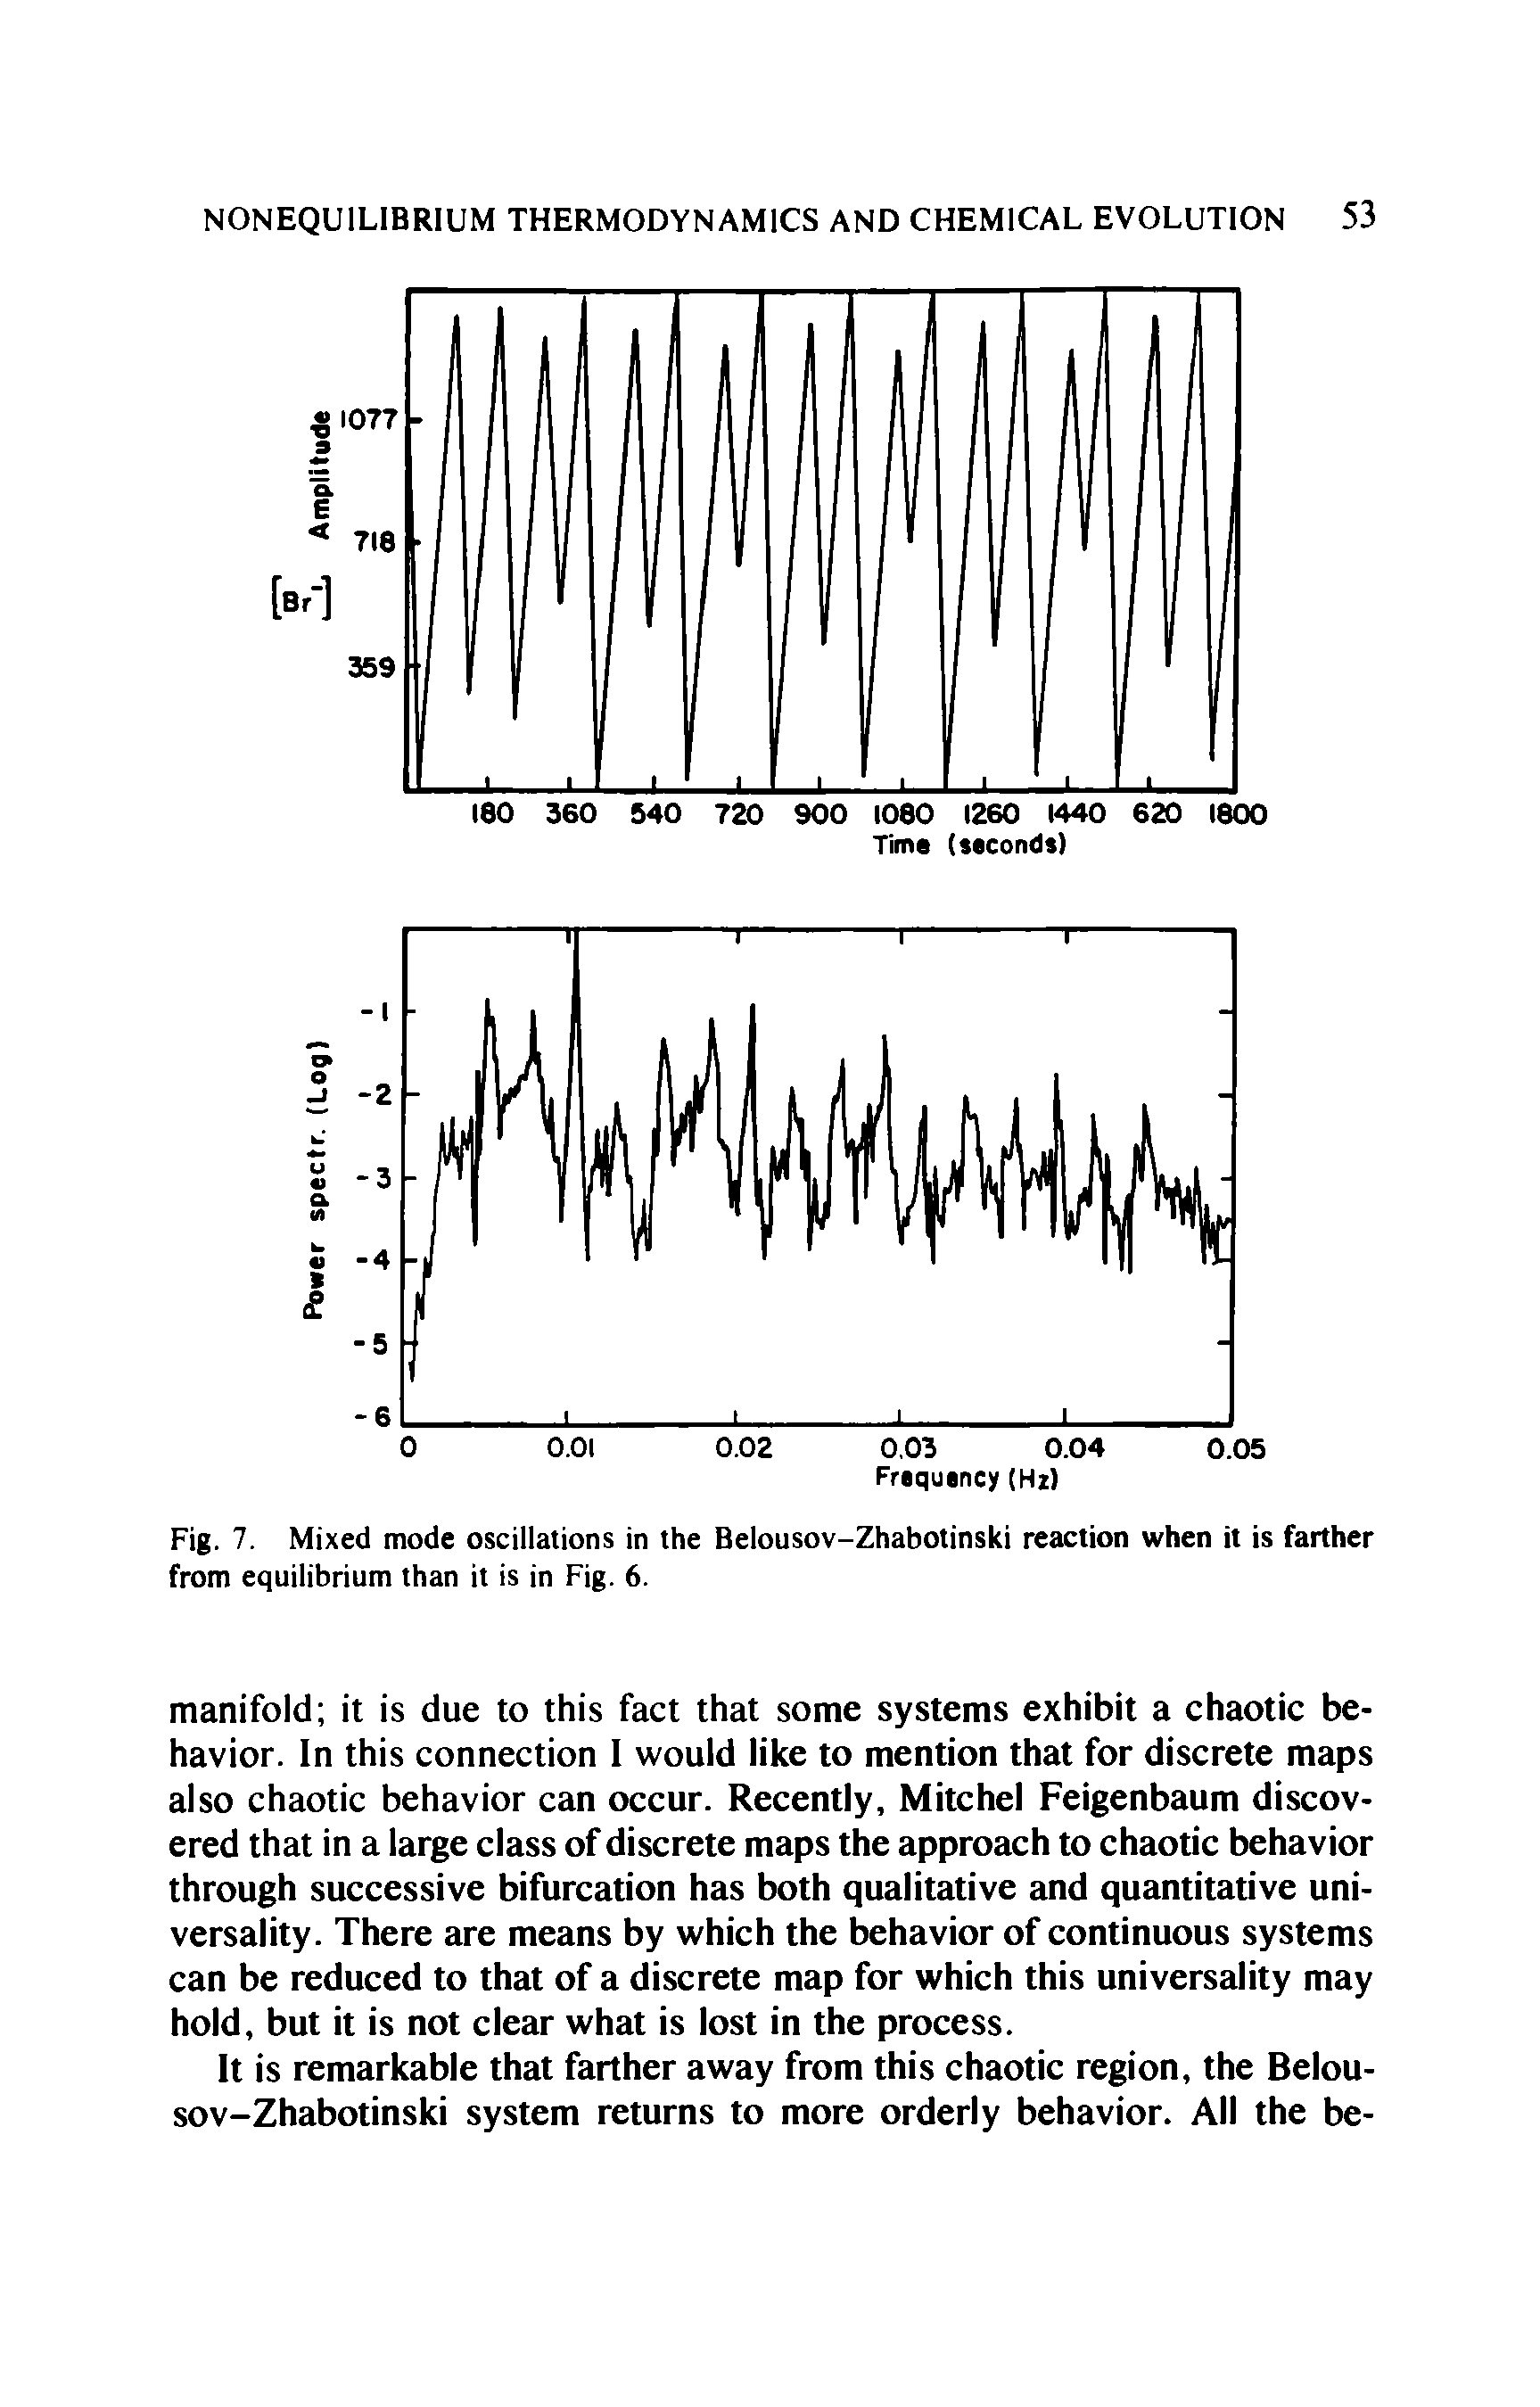 Fig. 7. Mixed mode oscillations in the Belousov-Zhabotinski reaction when it is farther from equilibrium than it is in Fig. 6.